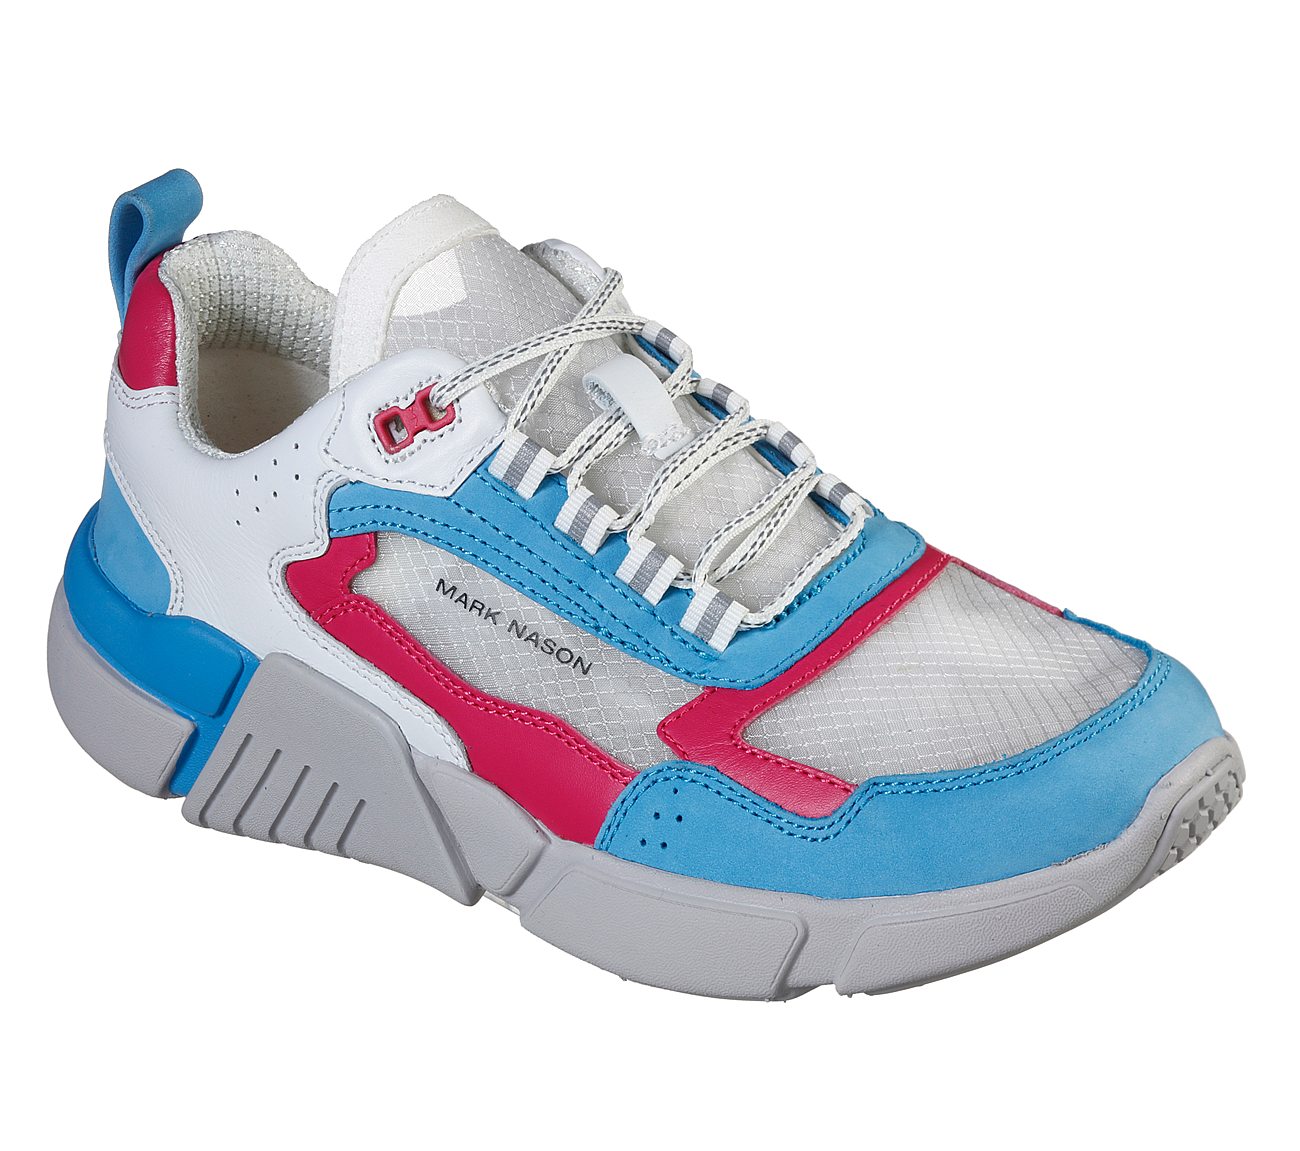 BLOCK - WEST, WHITE/BLUE/PINK Footwear Lateral View